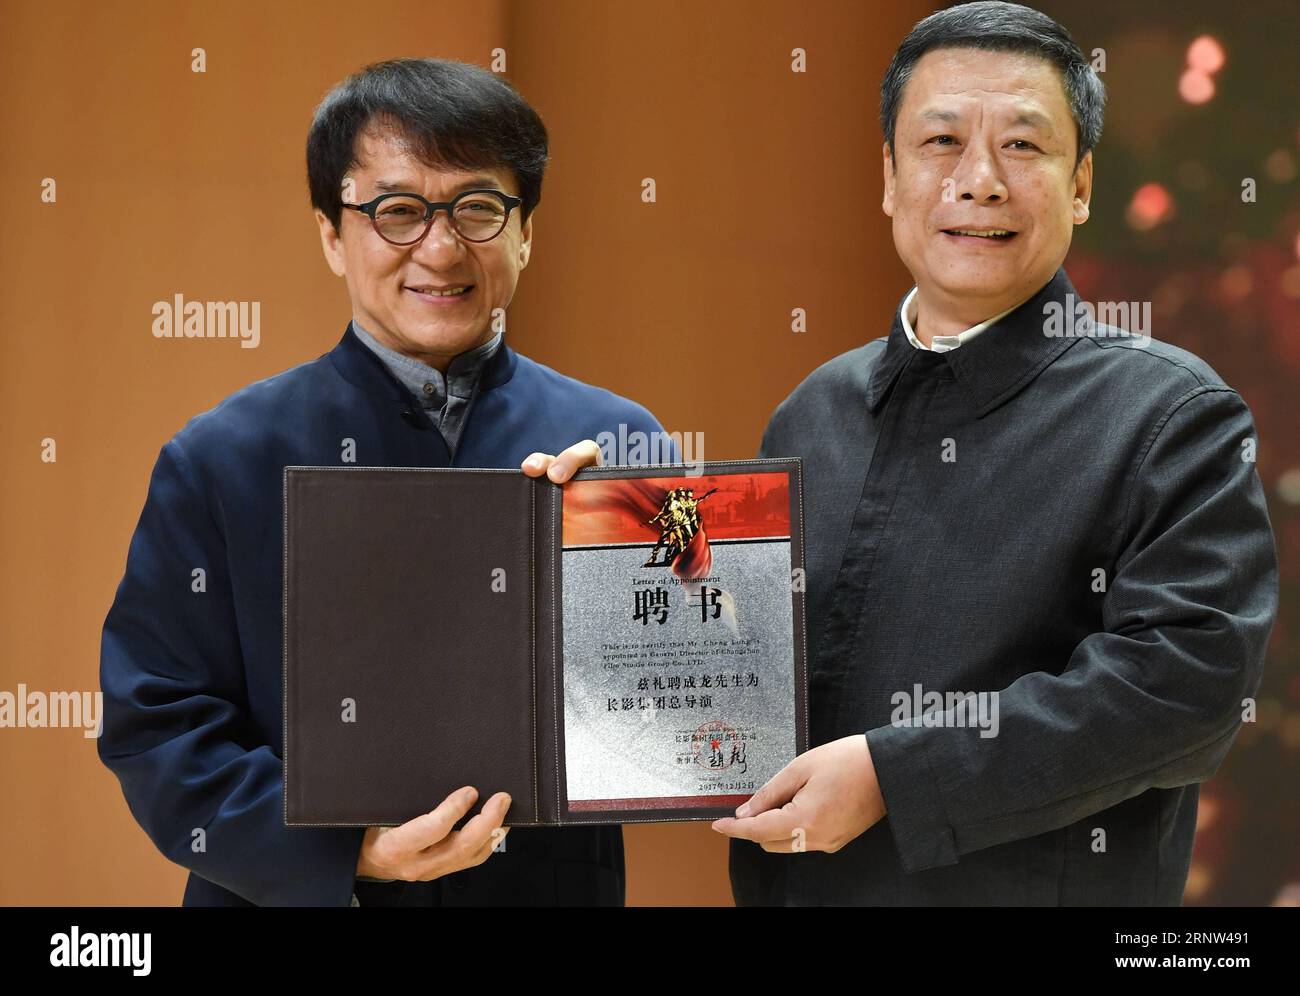 (171203) -- CHANGCHUN, Dec. 3, 2017 -- Movie star Jackie Chan (L) receives the Letter of Appointment to be appointed as General Director of Changchun Film Studio Group in Changchun, capital of northeast China s Jilin Province, Dec. 2, 2017. ) (ry) CHINA-CHANGCHUN-JACKIE CHAN-CEREMONY (CN) XuxChang PUBLICATIONxNOTxINxCHN Stock Photo